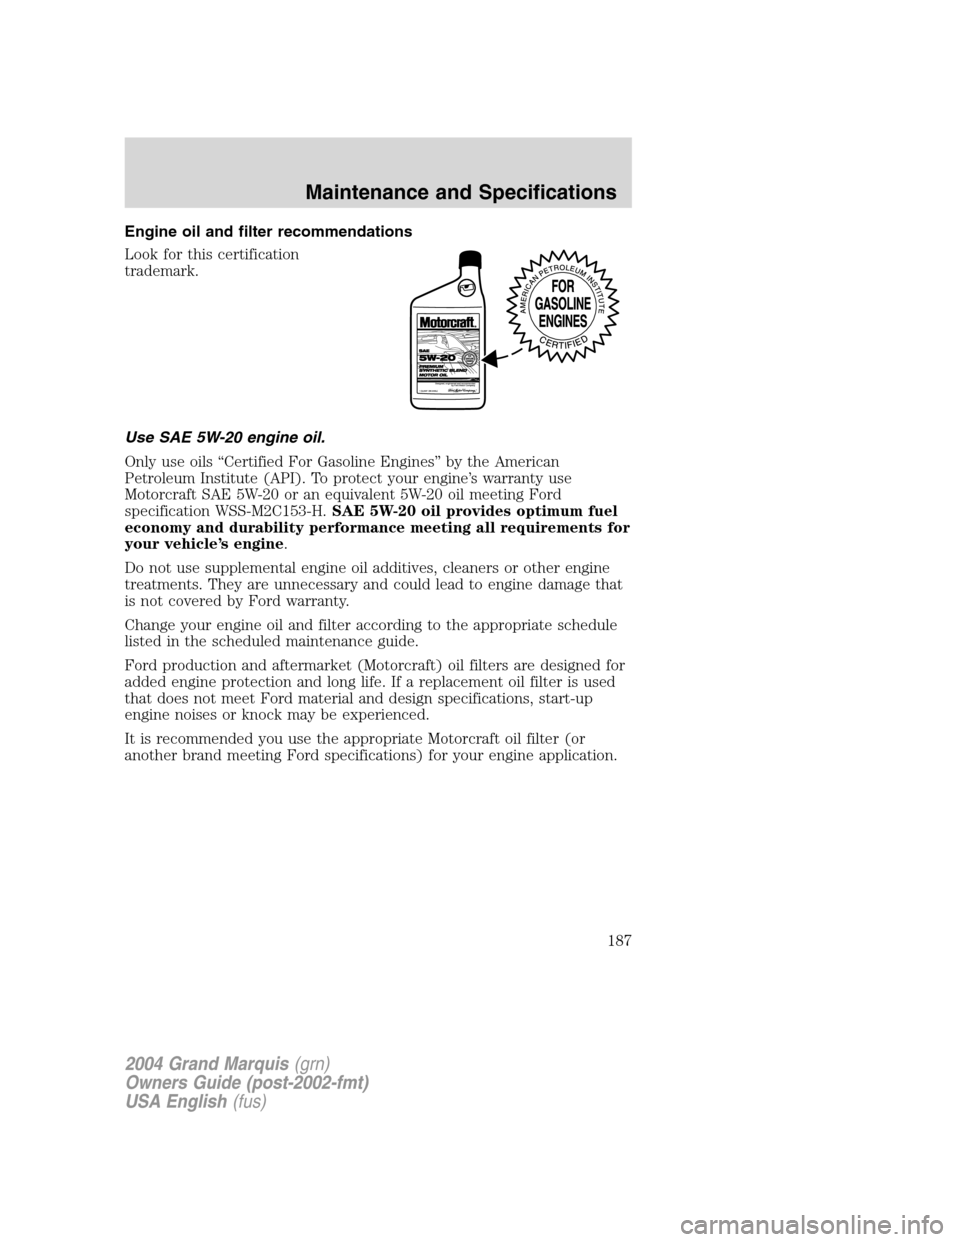 Mercury Grand Marquis 2004  Owners Manuals Engine oil and filter recommendations
Look for this certification
trademark.
Use SAE 5W-20 engine oil.
Only use oils“Certified For Gasoline Engines”by the American
Petroleum Institute (API). To pr